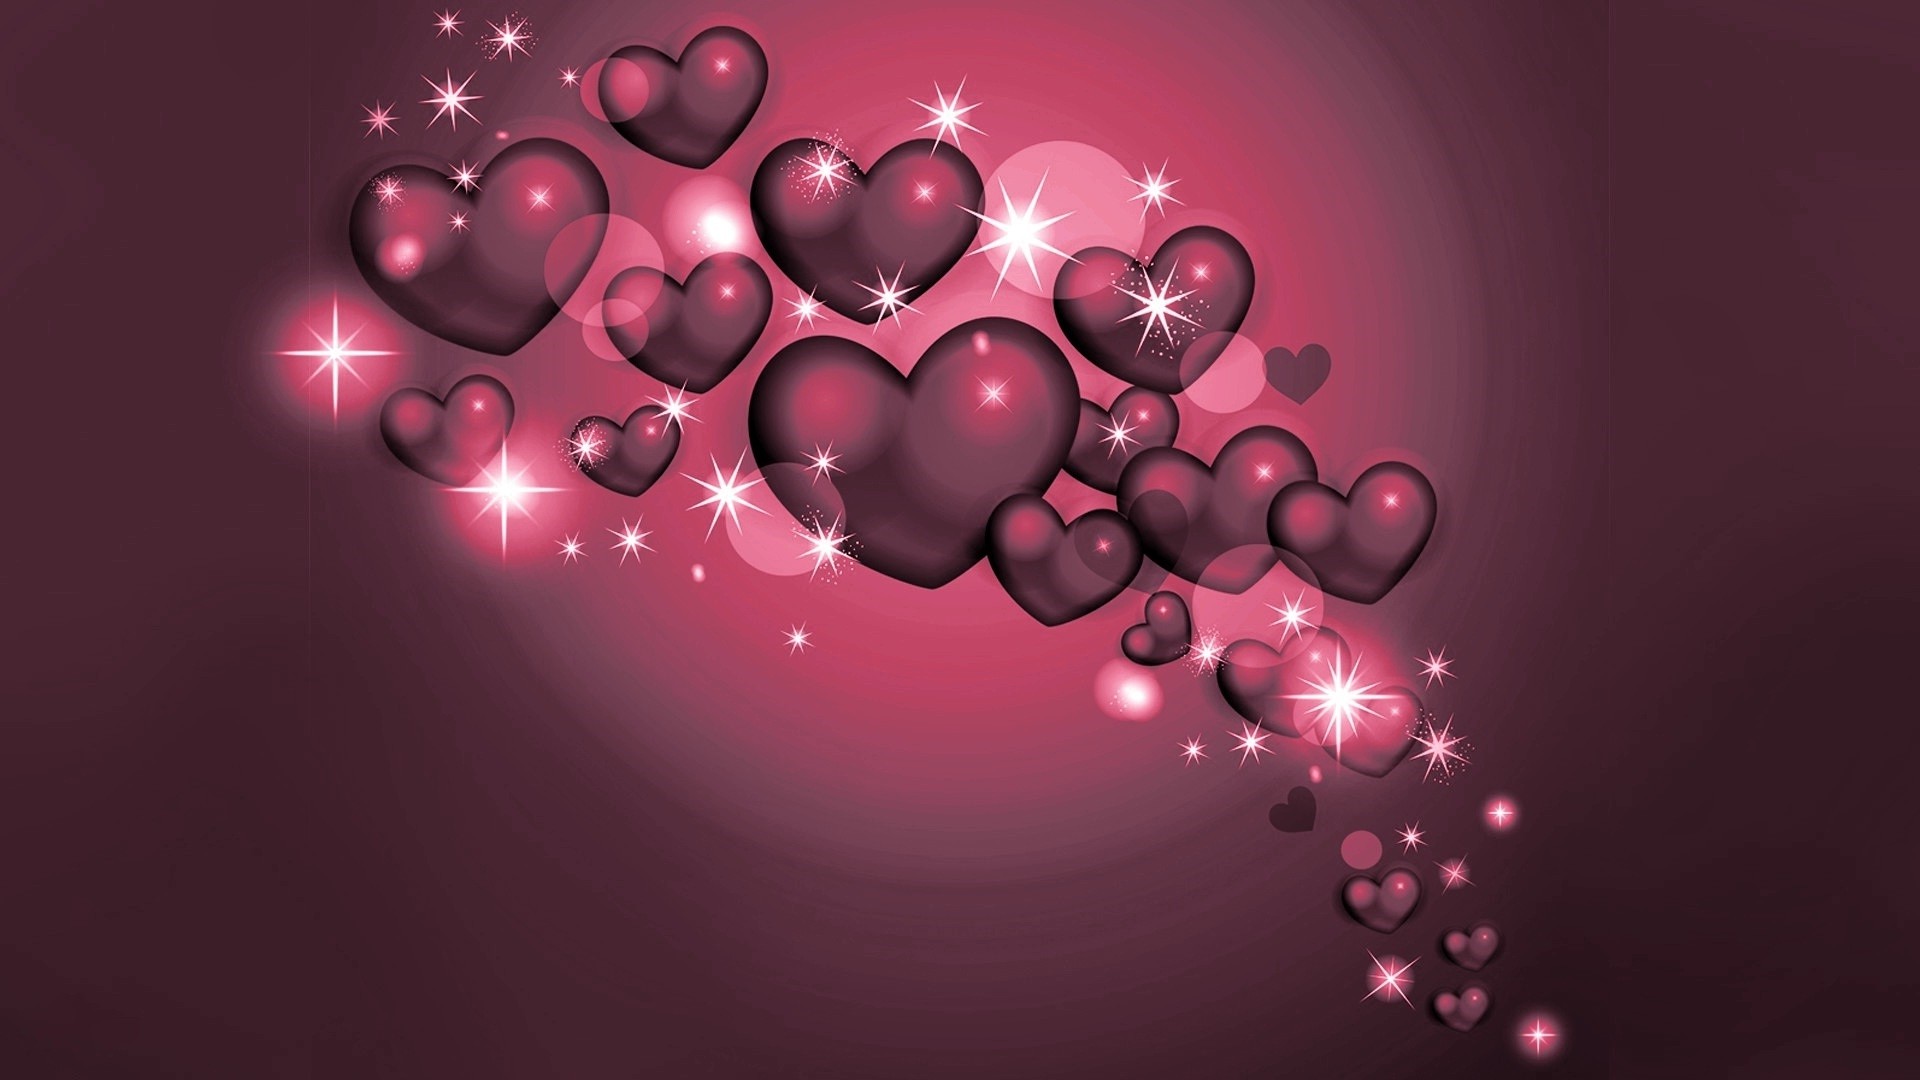 Free download 70 Love Hd Wallpapers on WallpaperPlay [1920x1080] for